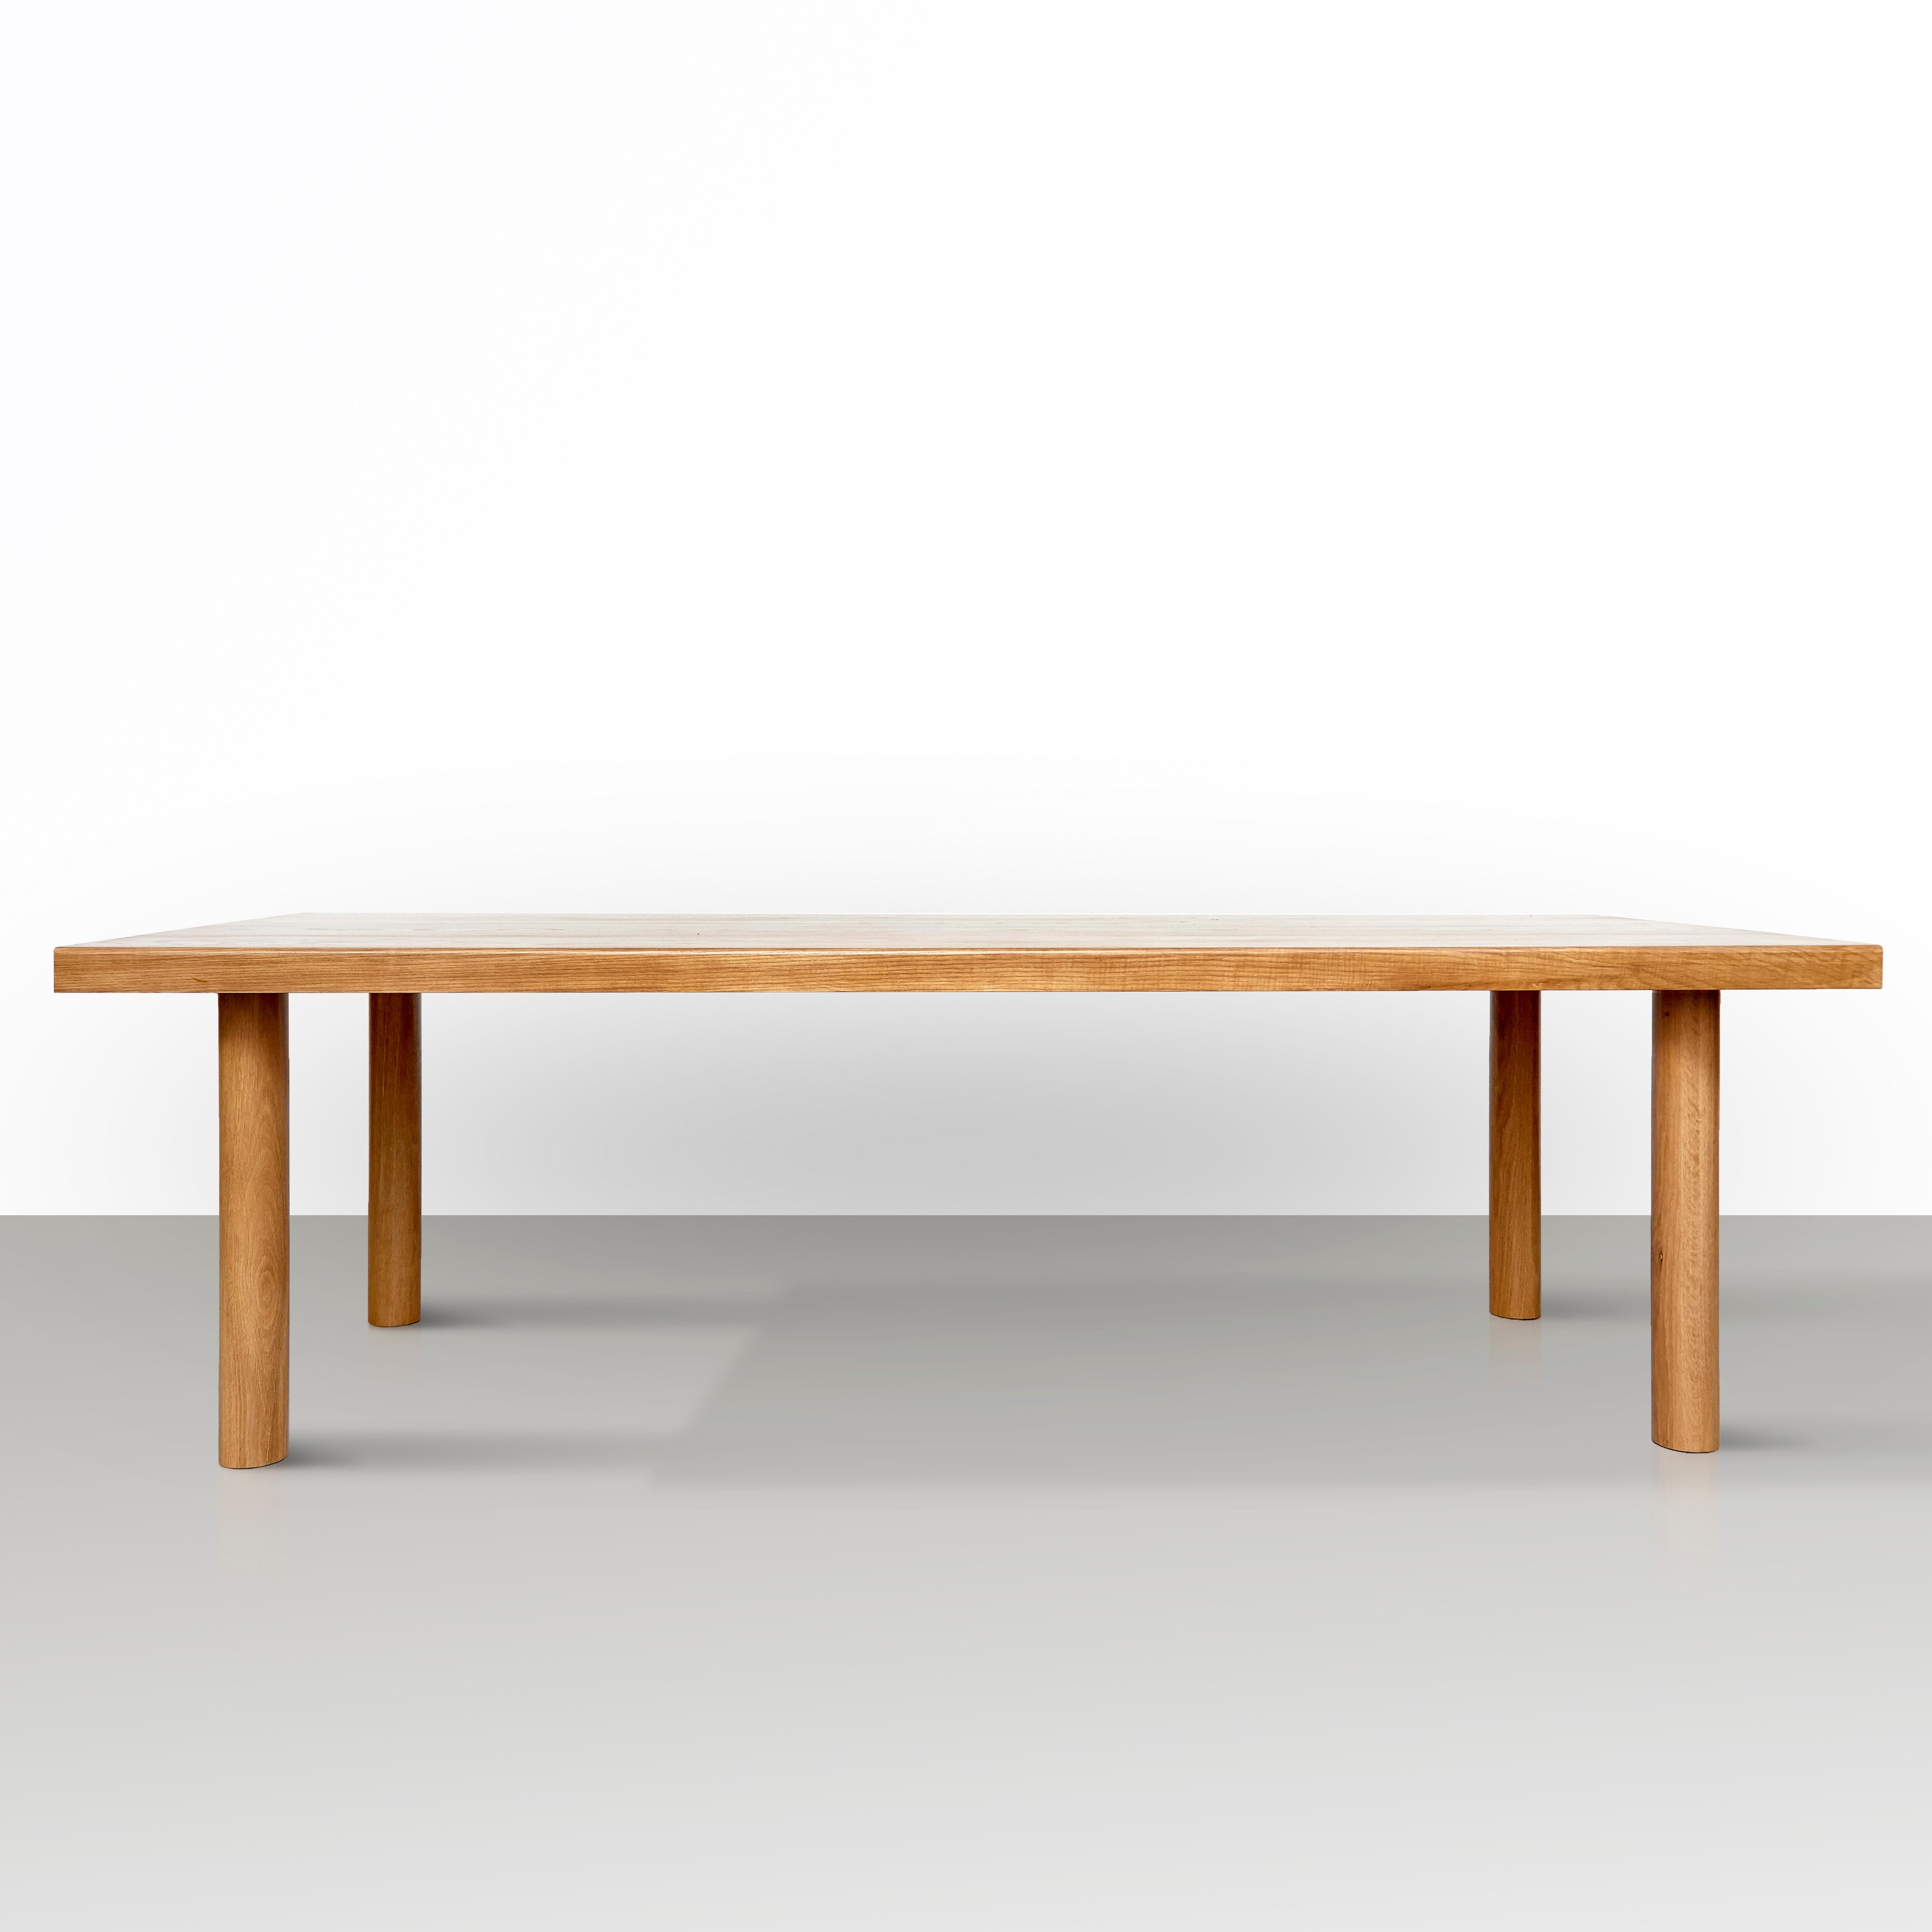 Large dining table by Dada est. manufactured in Barcelona, 2017.

Solid Ash tree eight people Table

Measures: 112.5 cm D x 220 cm W x 75 cm H 

Production delay: 6-8 weeks
There is the possibility of making it in different measures and